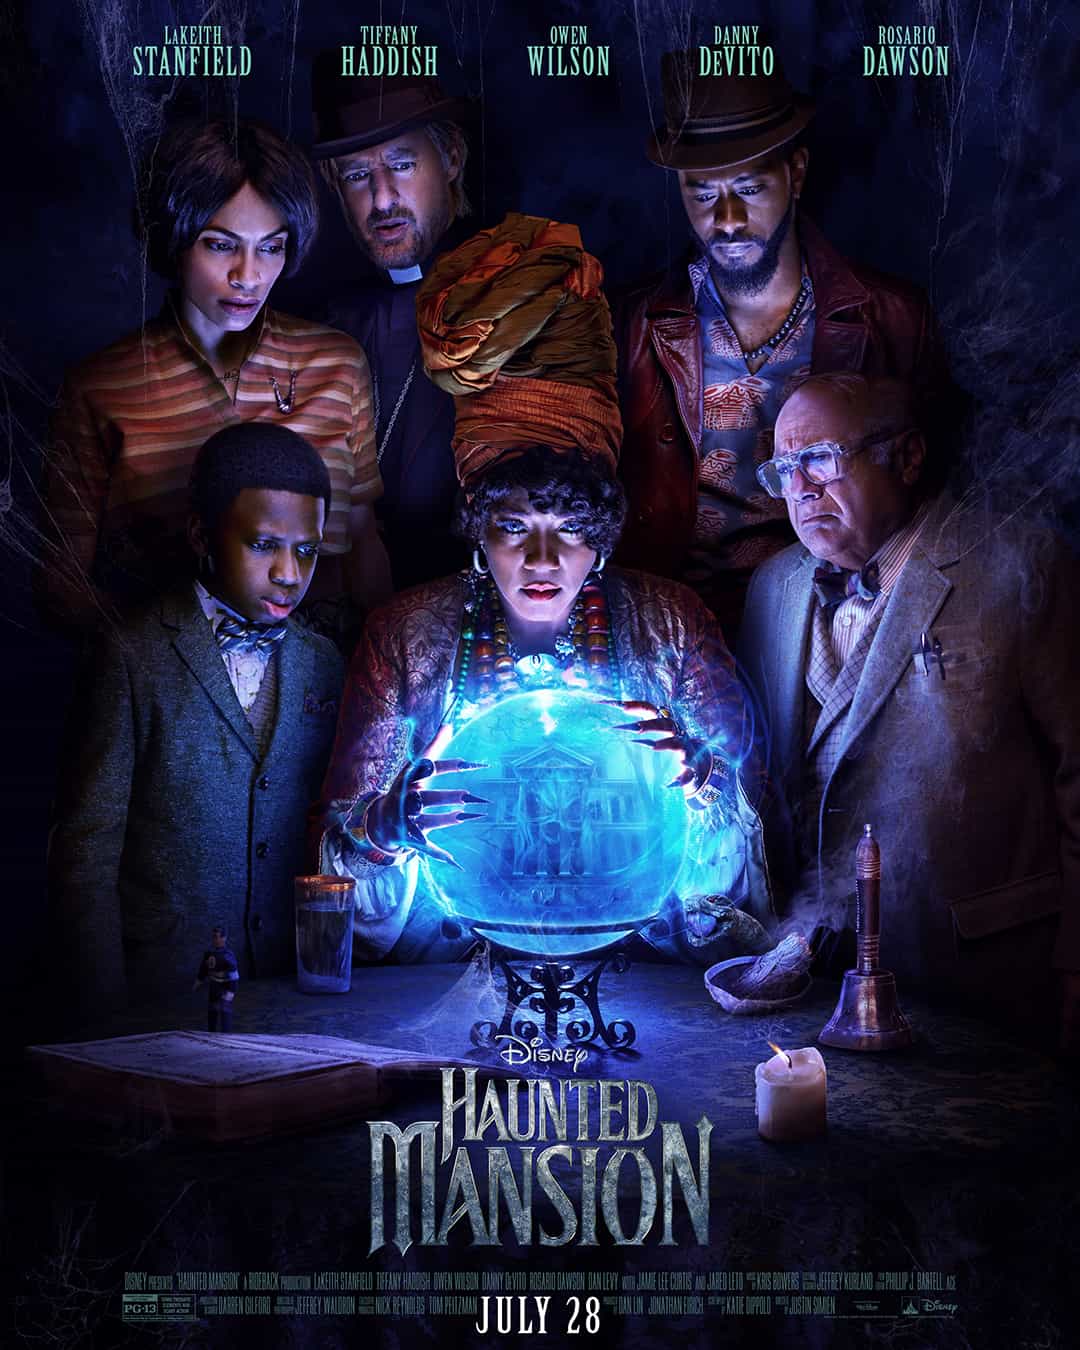 Check out the new trailer and poster for upcoming movie Haunted Mansion which stars LaKeith Stanfield and Tiffany Haddish - movie UK release date 11th August 2023 #hauntedmansion